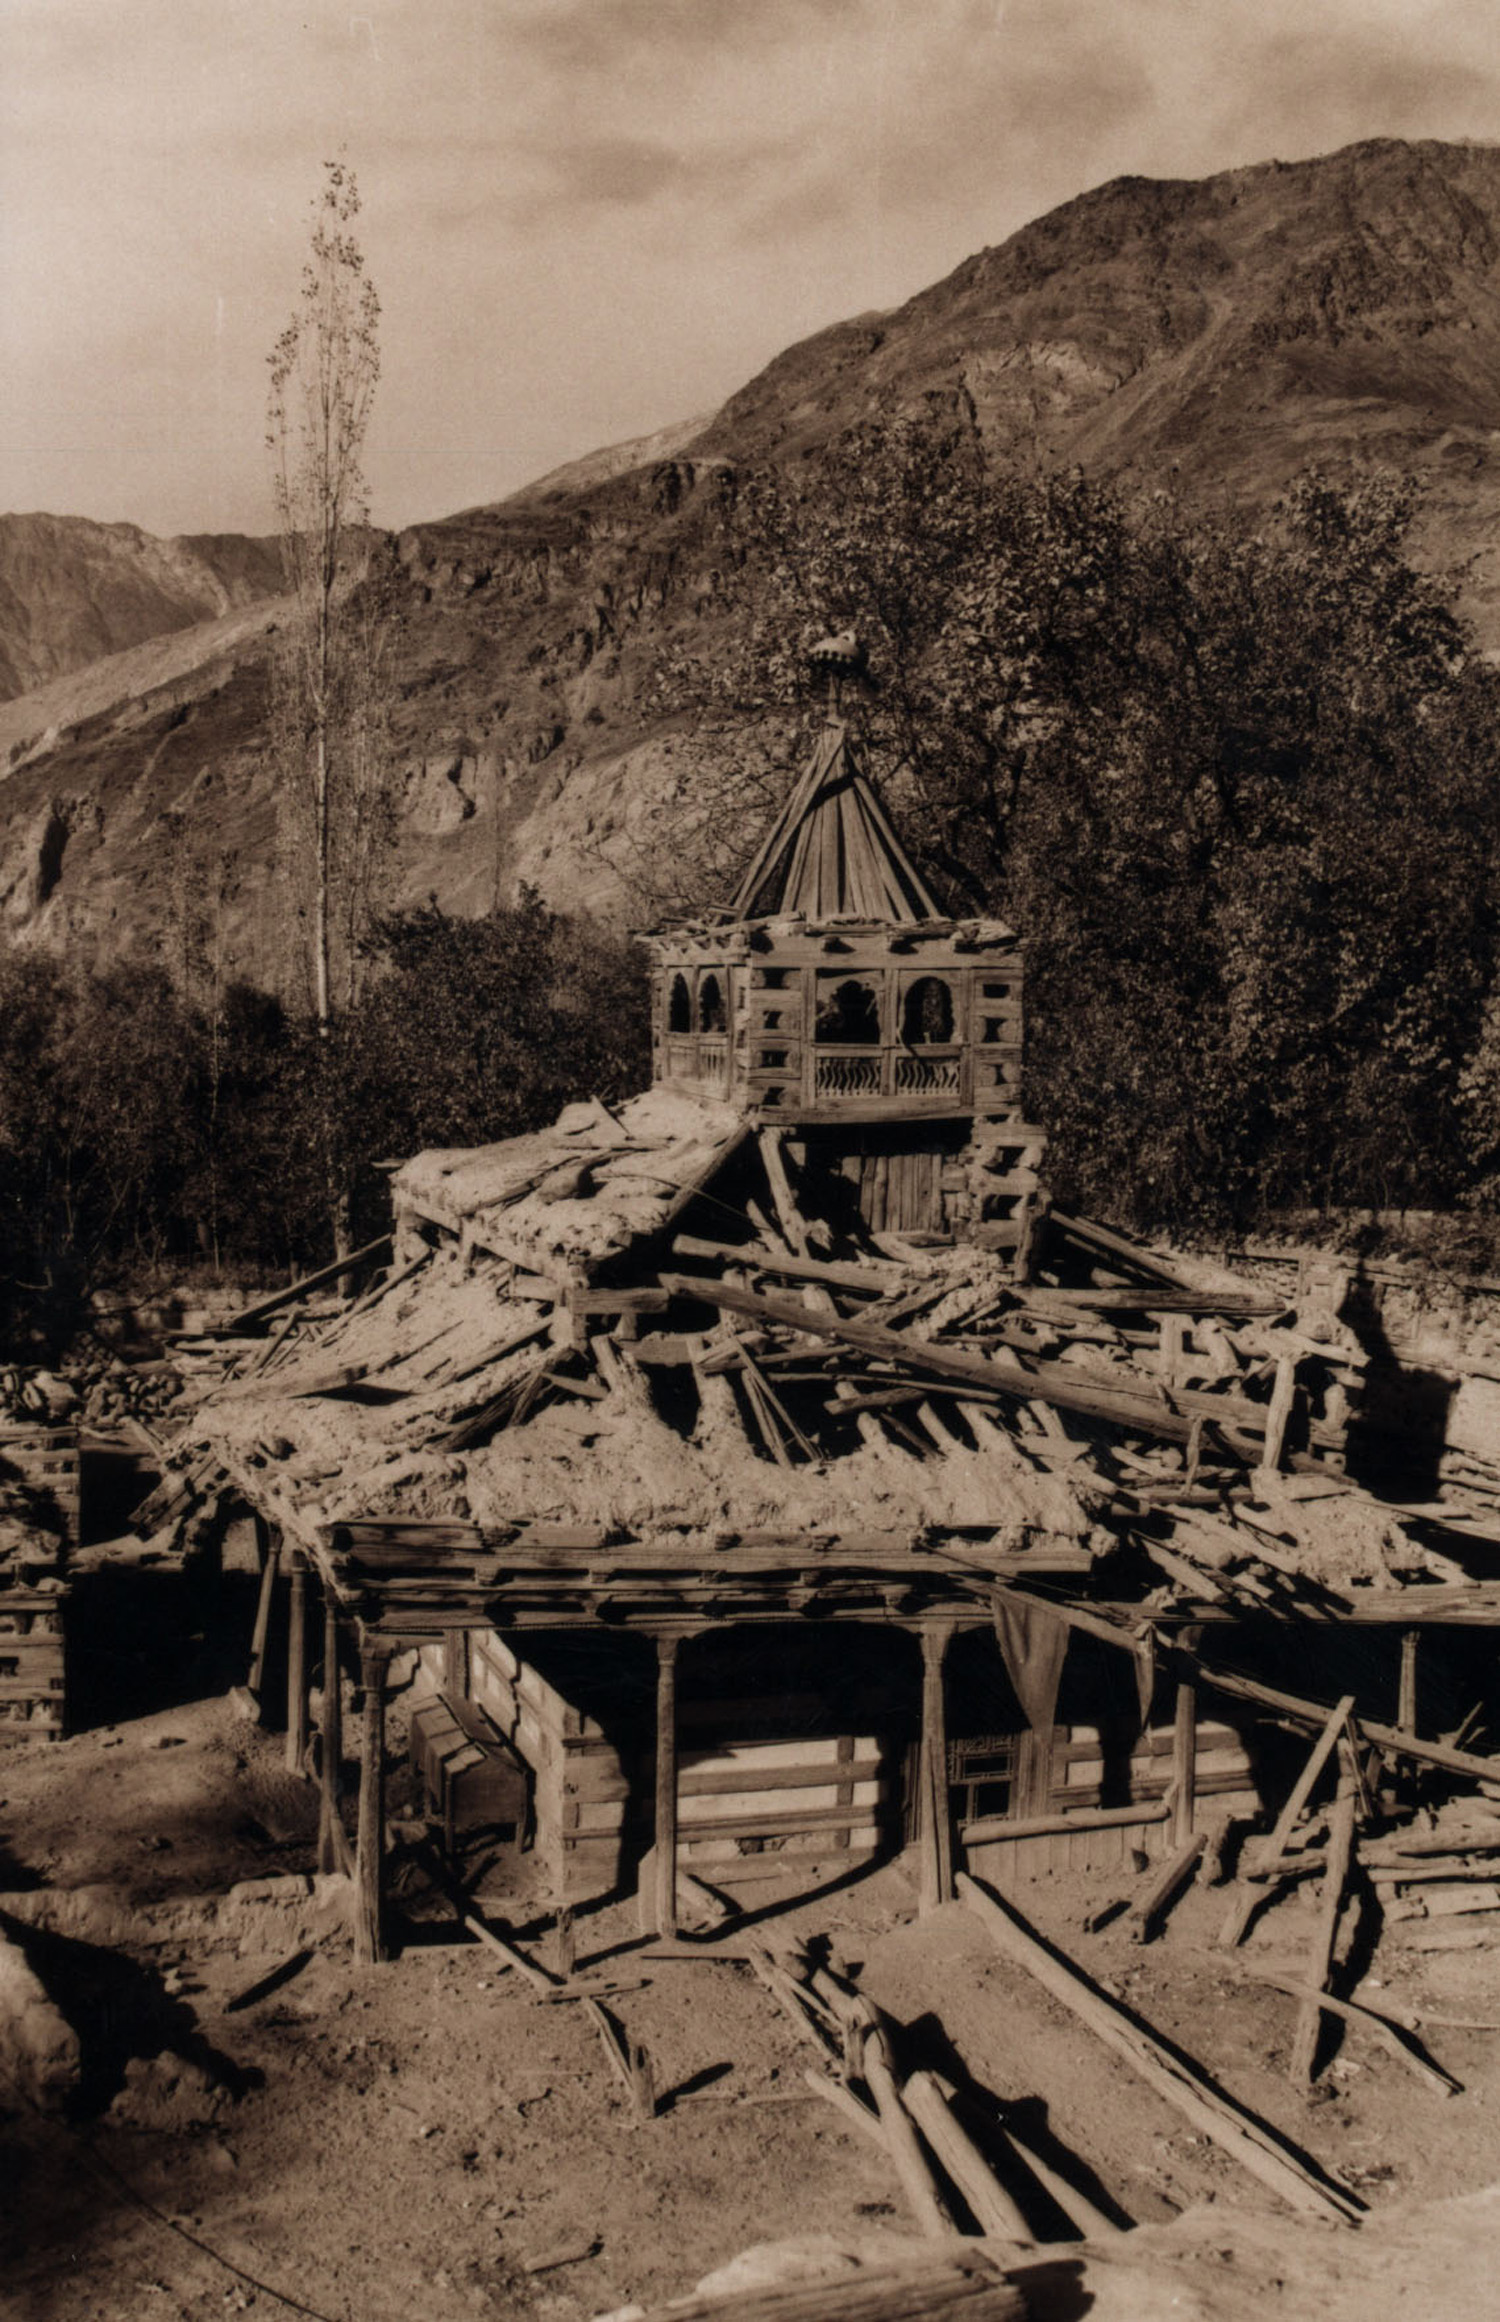 Photo showing the detoriated condition of the structure, before restoration